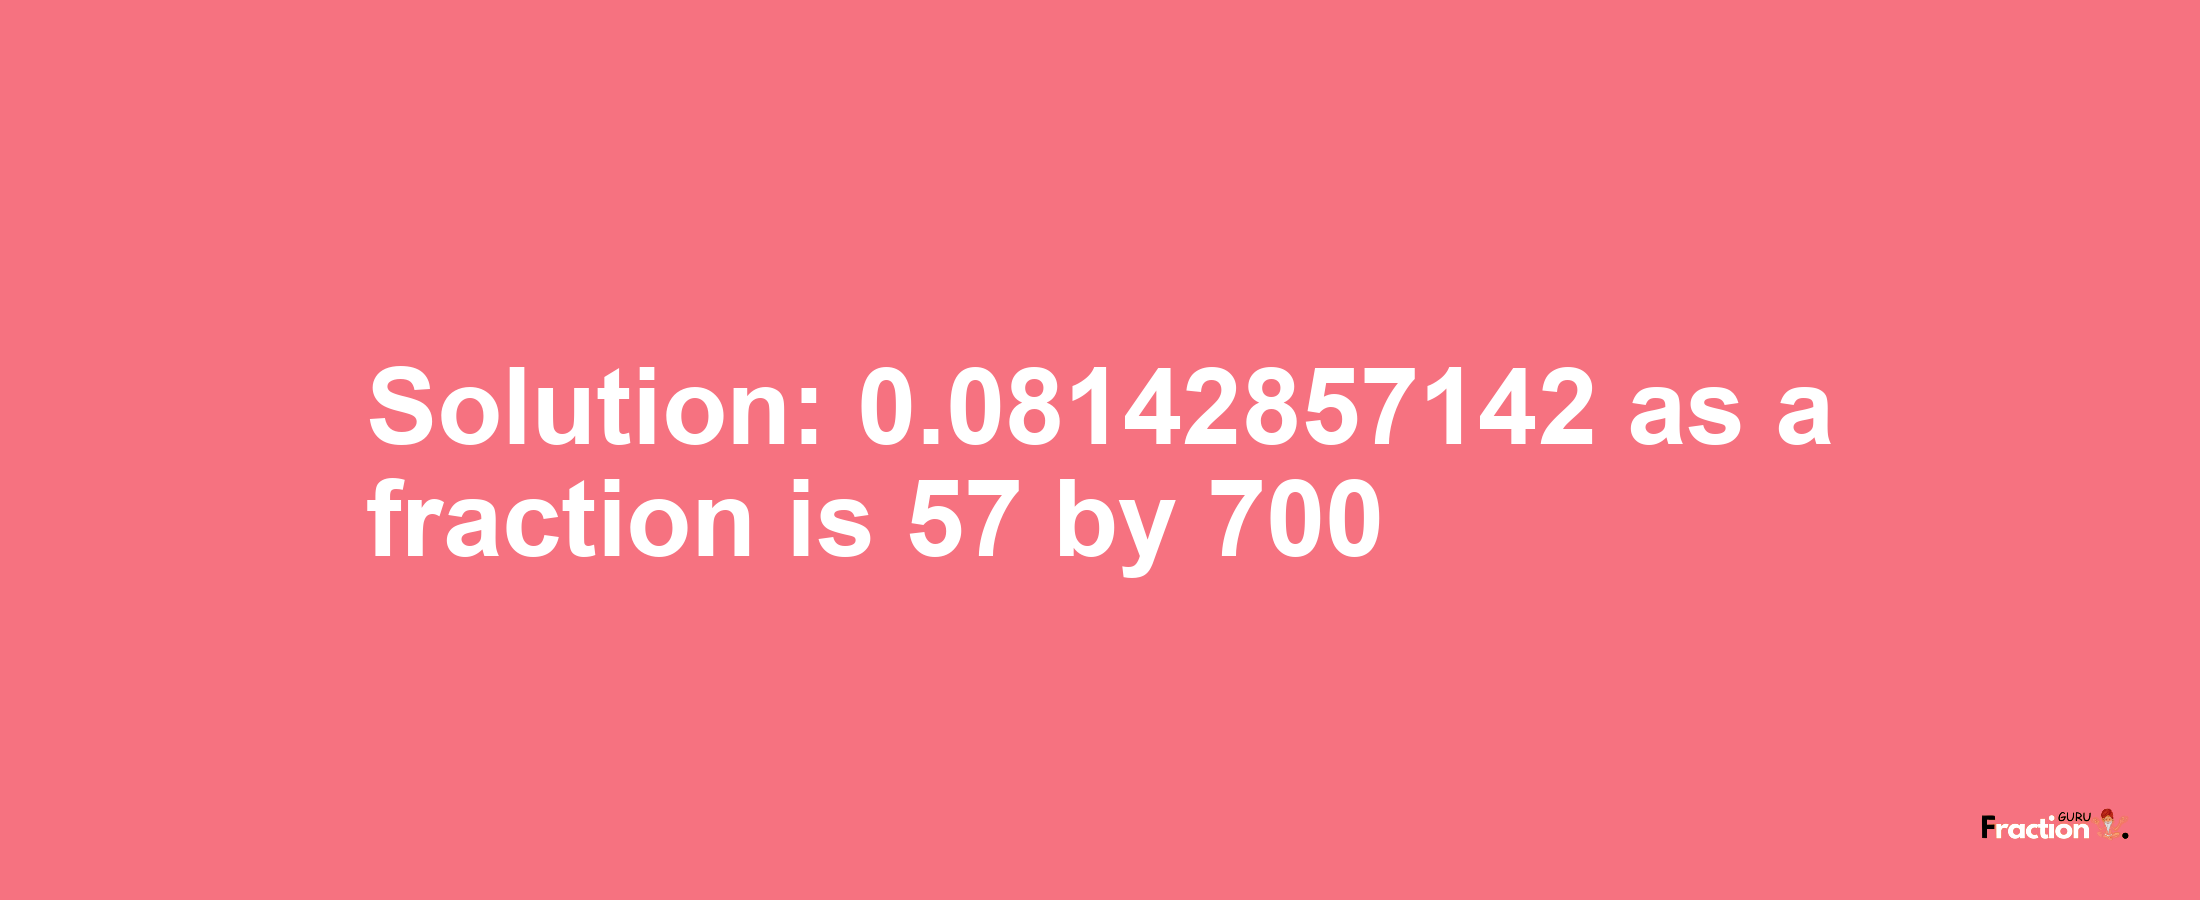 Solution:0.08142857142 as a fraction is 57/700